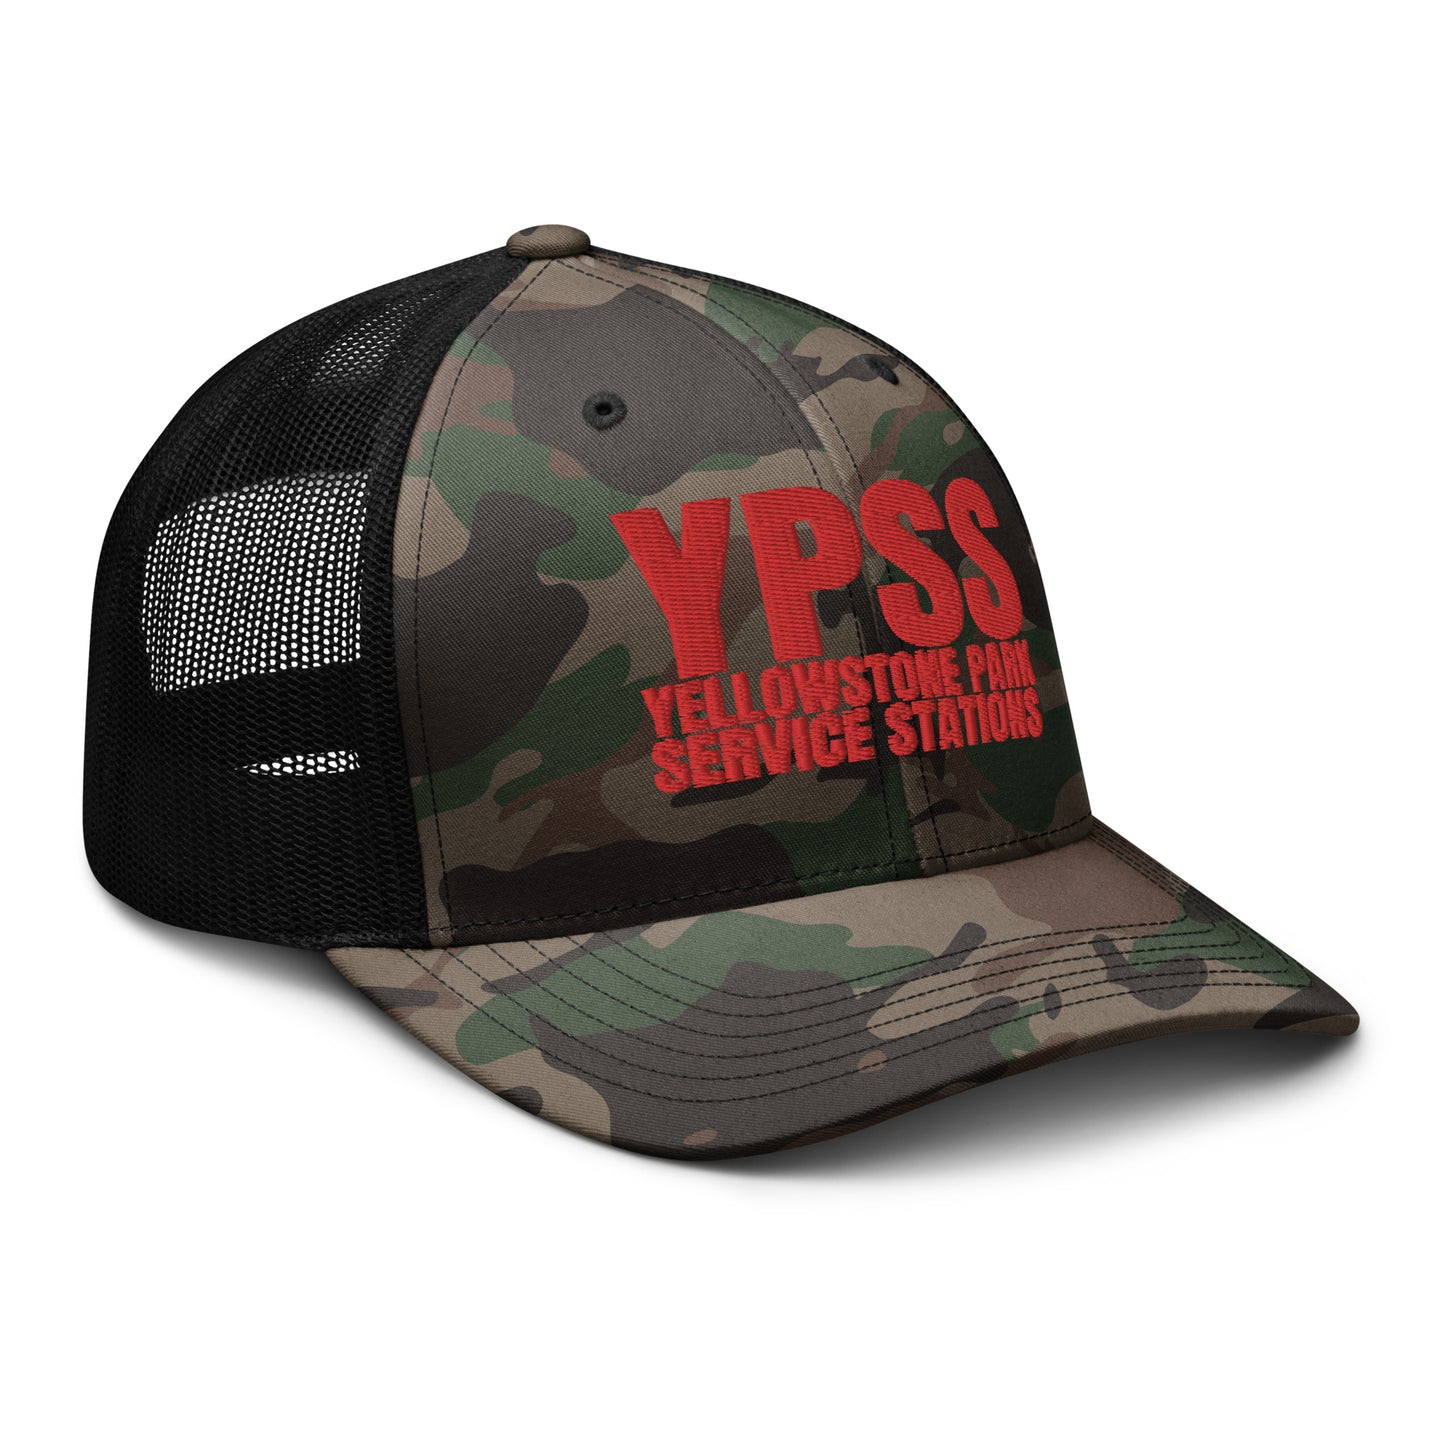 YPSS | Yellowstone Park Service Stations Camouflage trucker hat